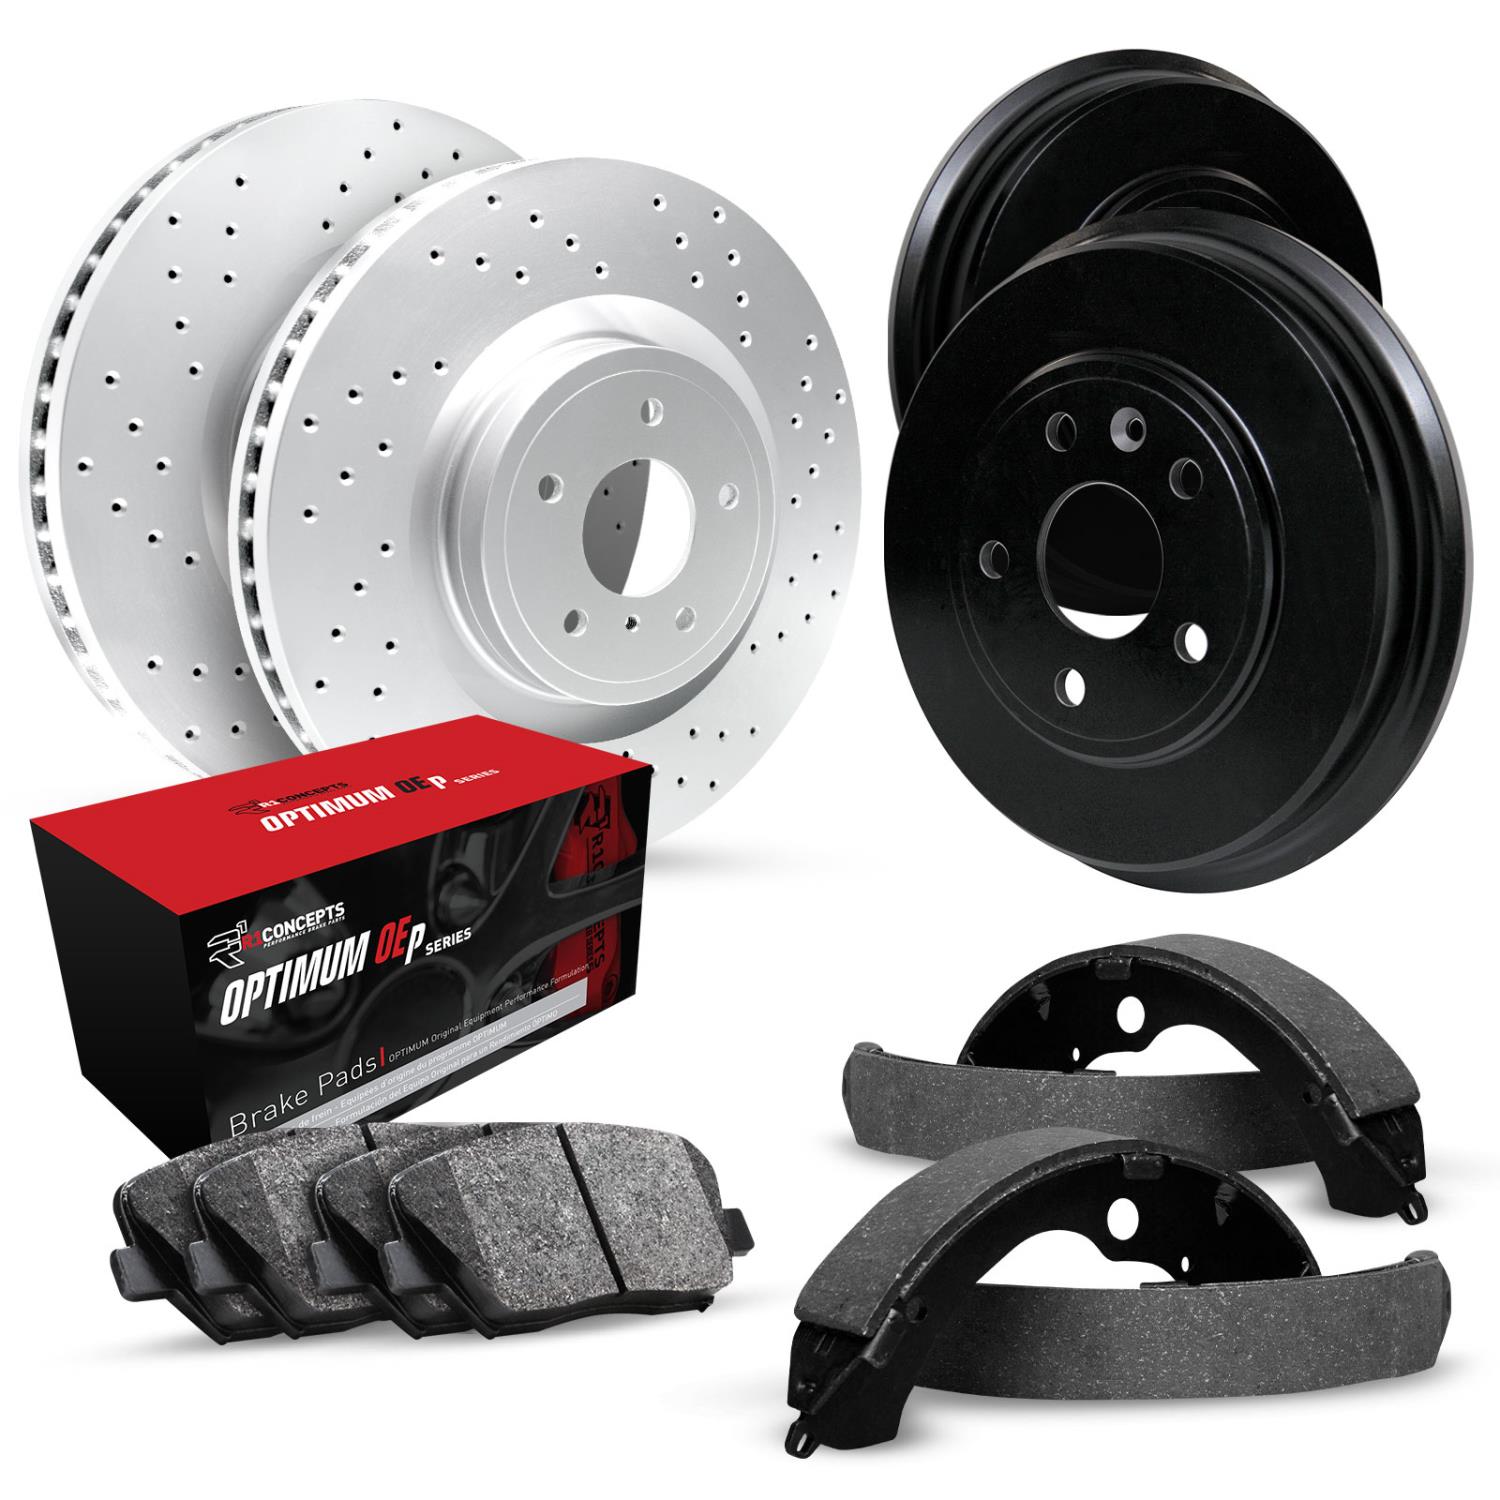 GEO-Carbon Drilled Brake Rotor & Drum Set w/Optimum OE Pads & Shoes, 1990-2002 GM, Position: Front & Rear